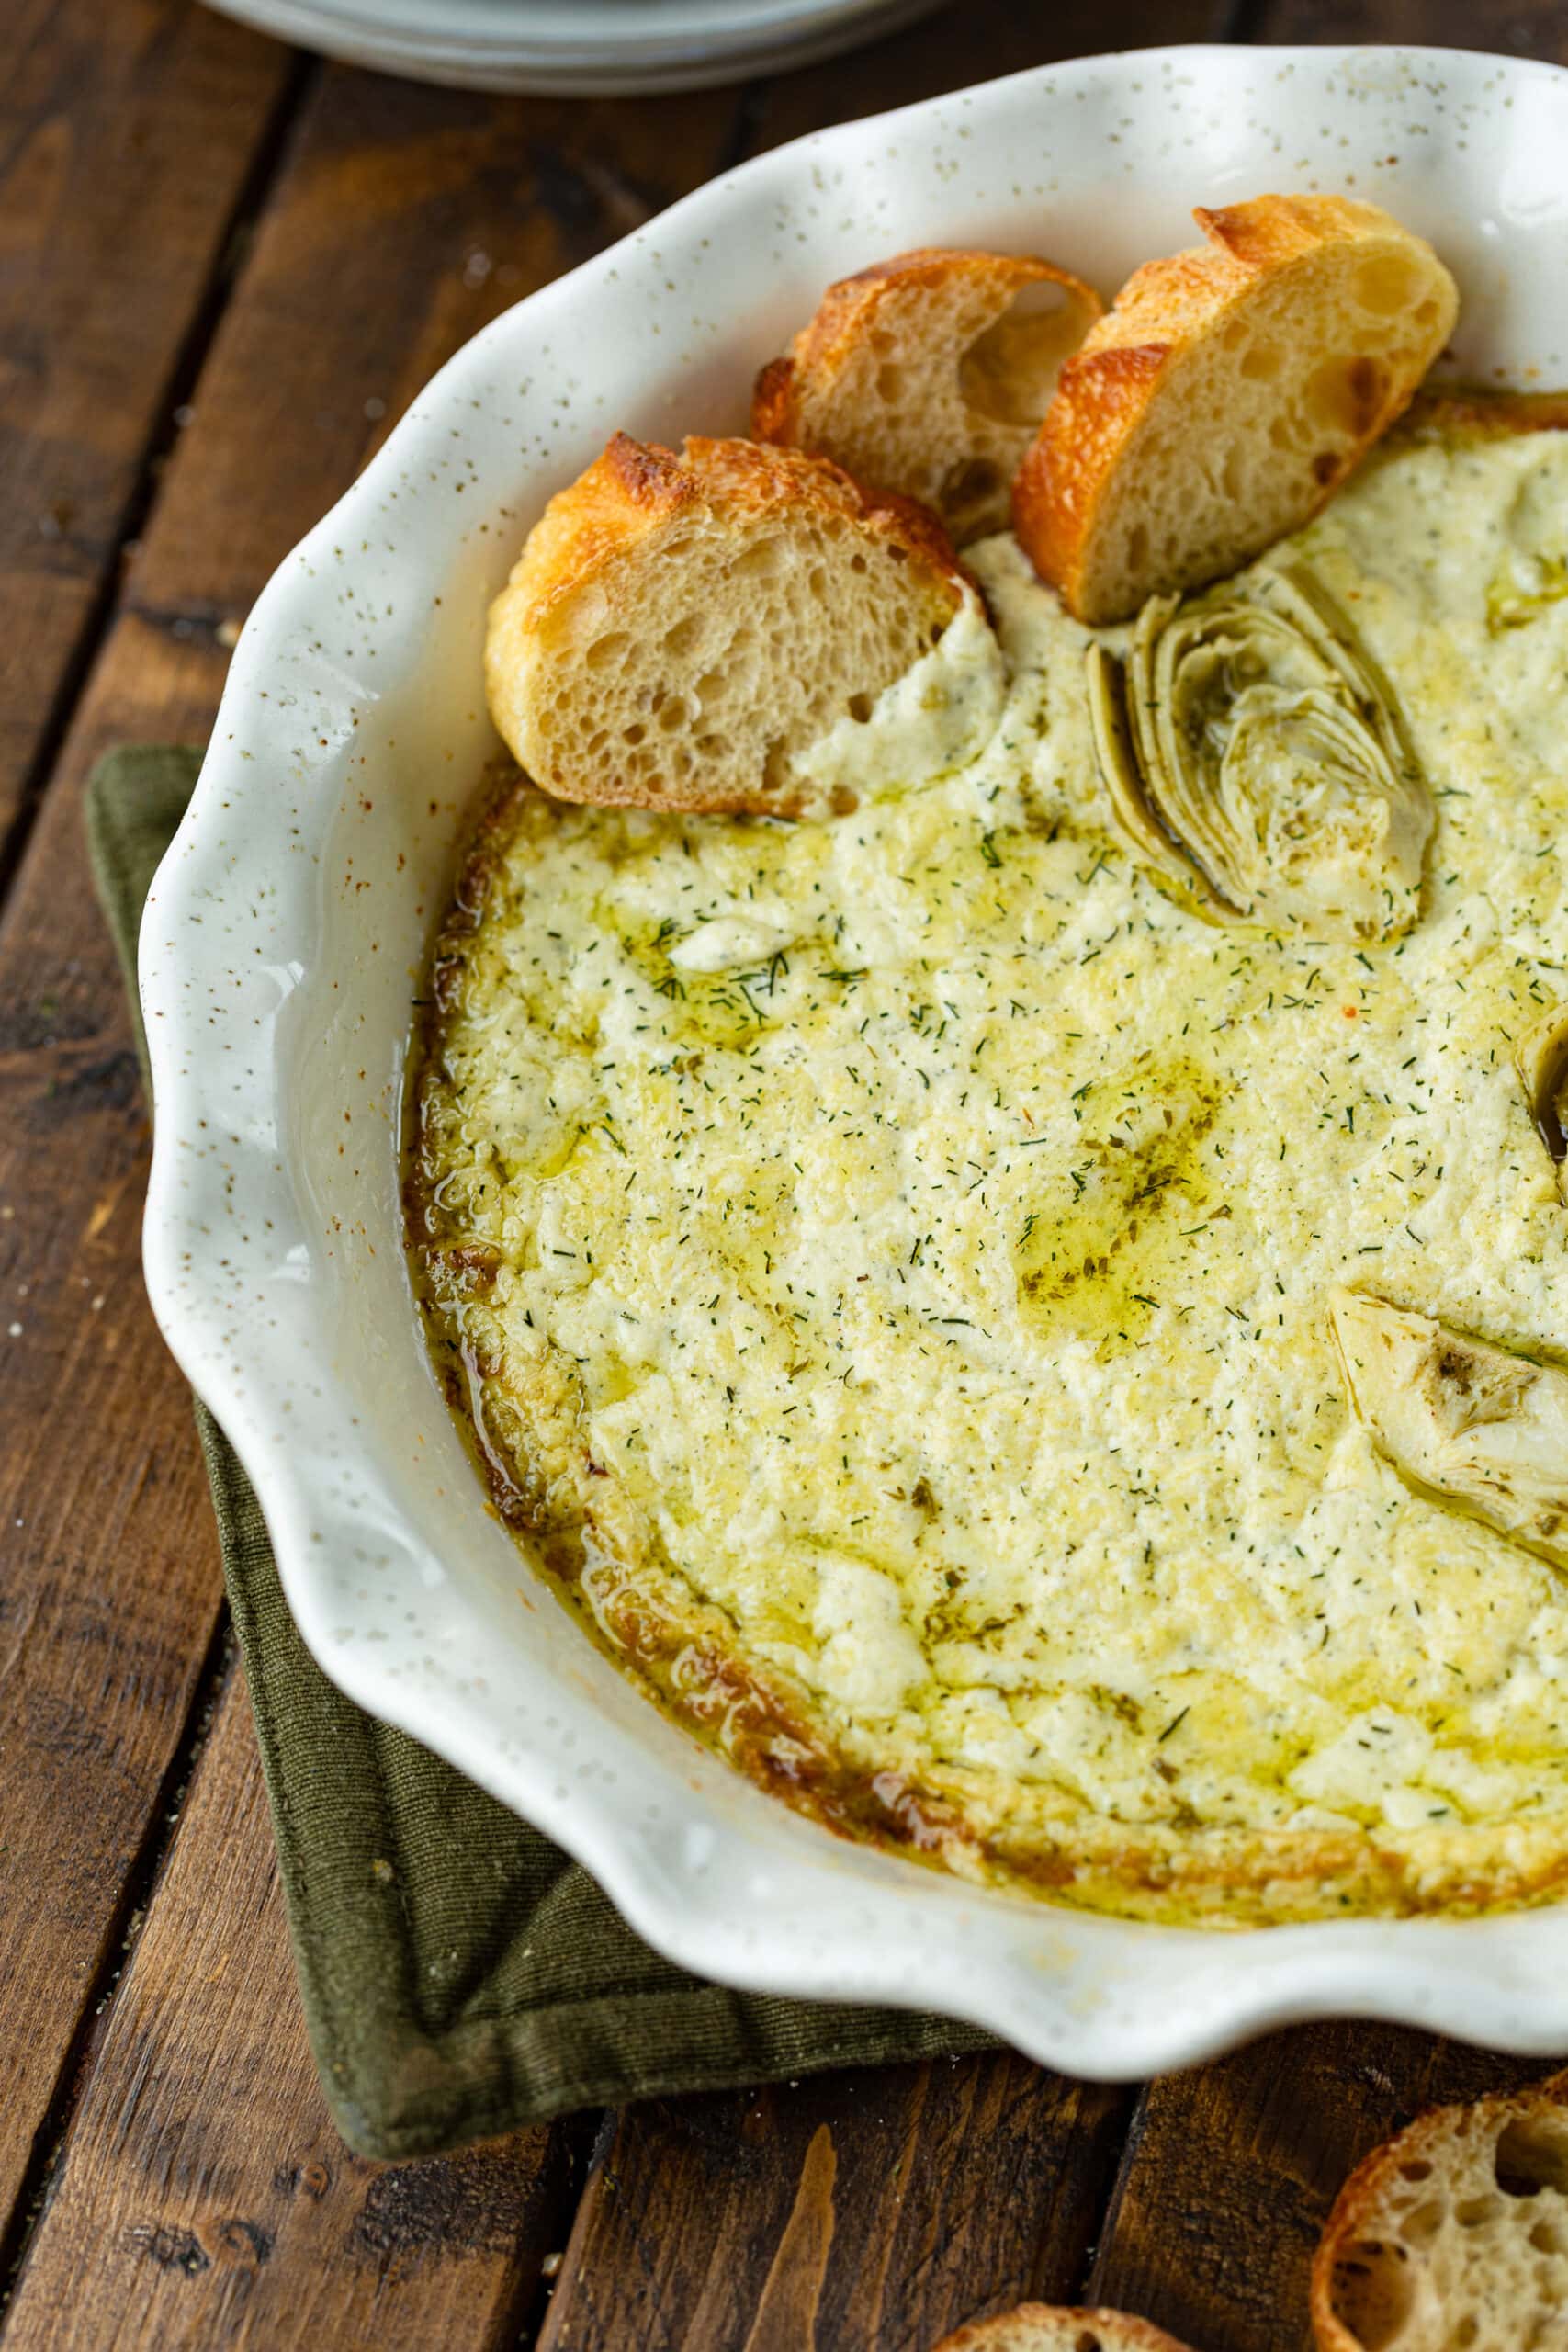 a close up photo of a baking dish full of baked creamy artichoke dip topped with chunks of artichoke and slices of baguette.